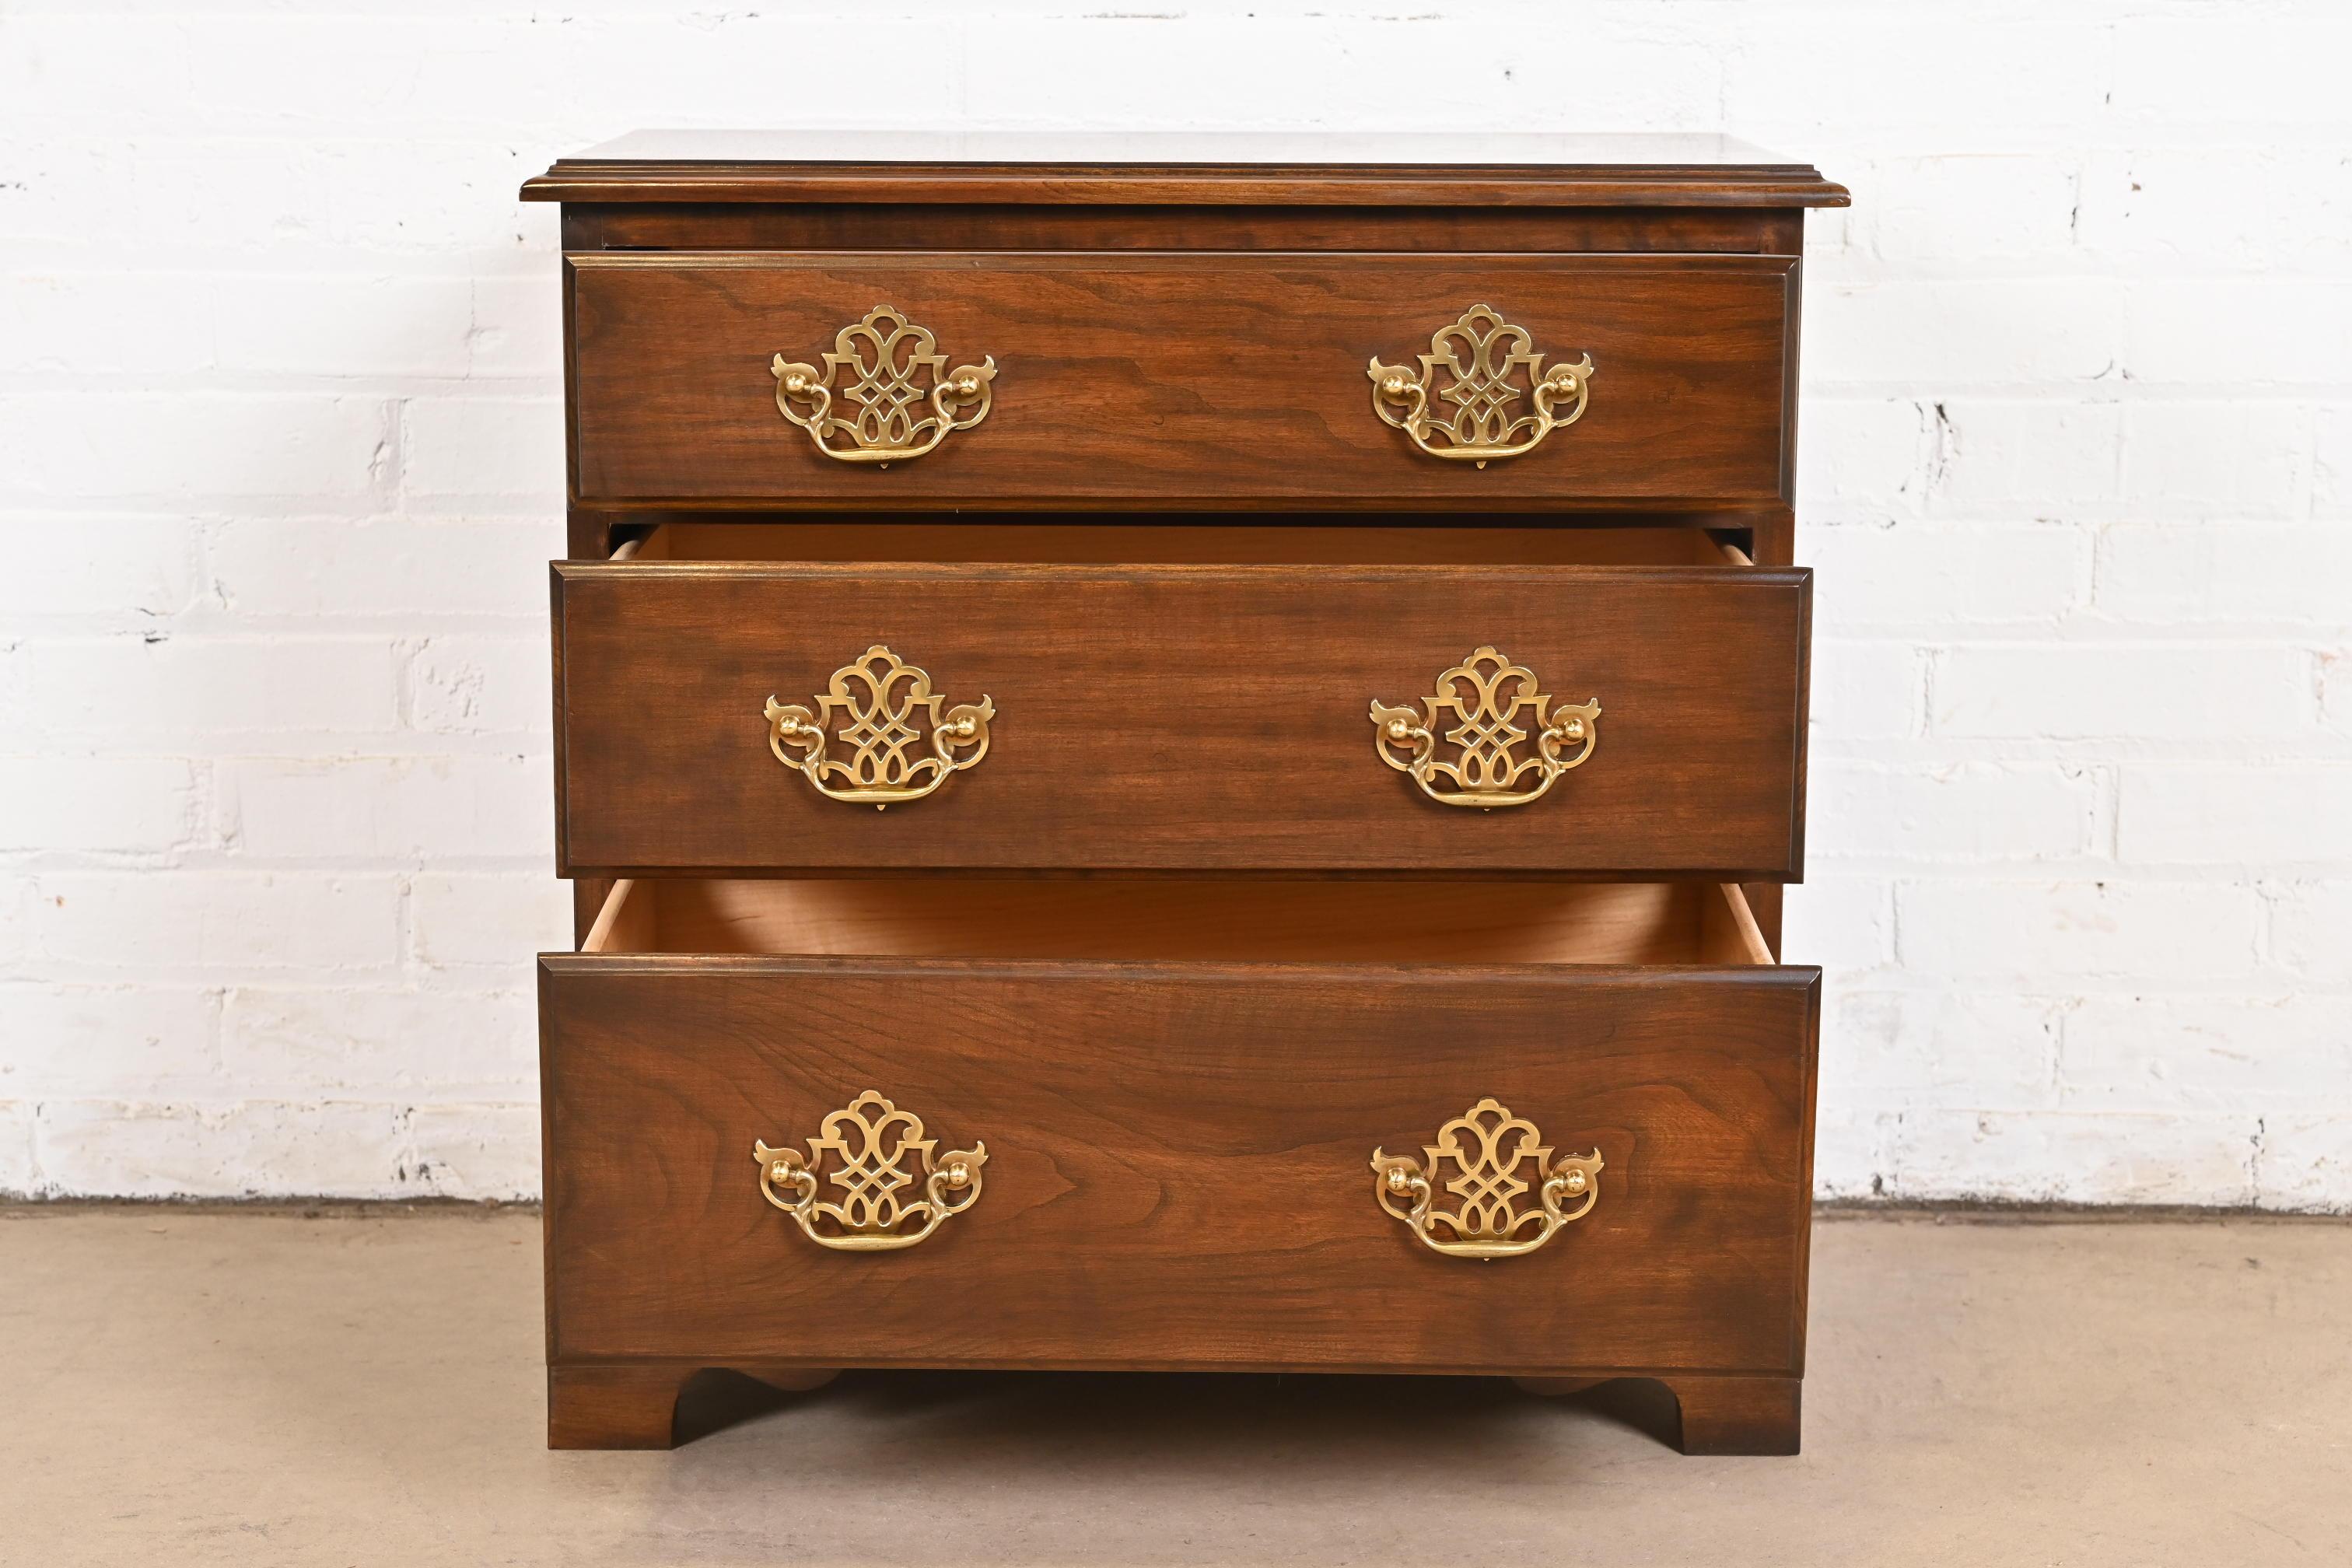 Brass Harden Furniture Georgian Solid Cherry Wood Three-Drawer Bedside Chest For Sale